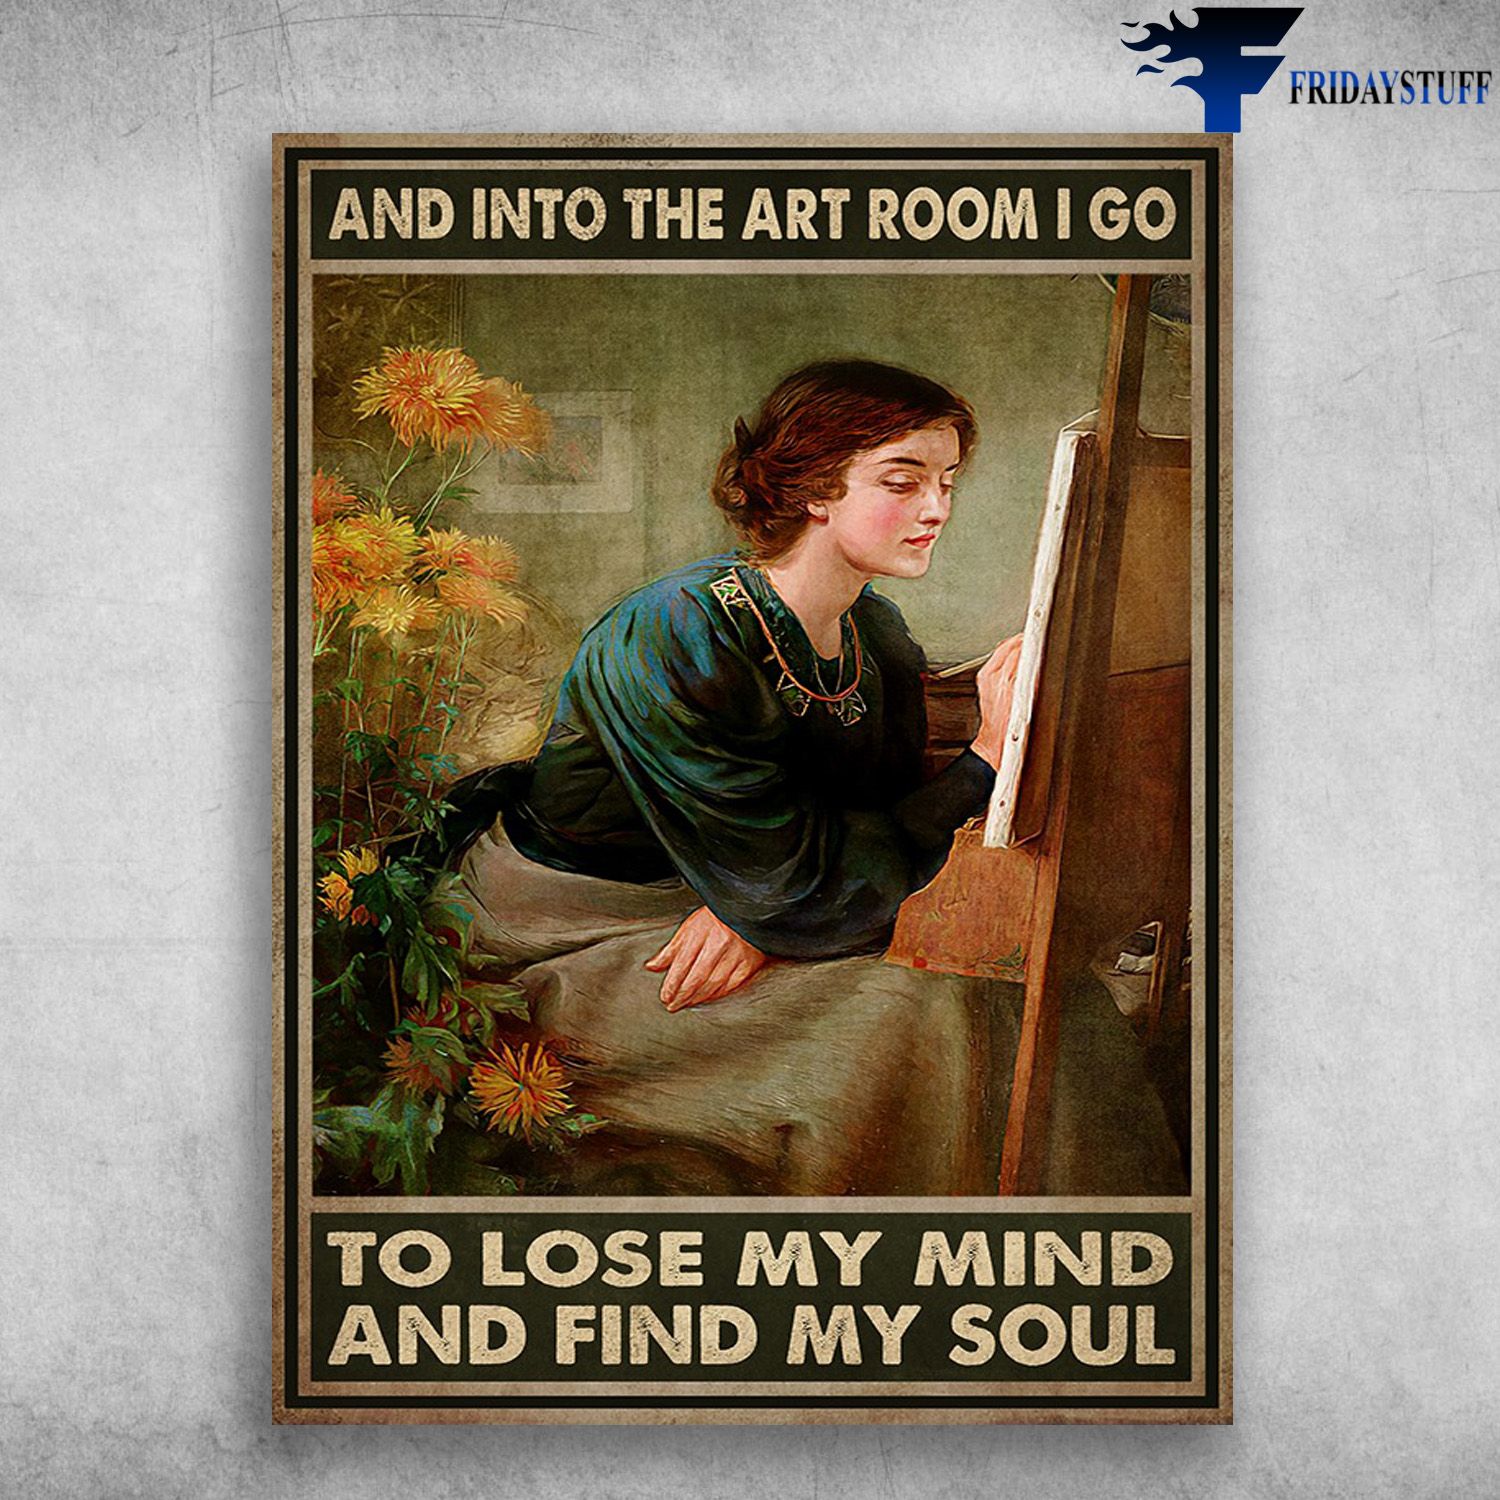 Lady Drawing, Girl Flower - And Into The Art Room, I Go To Lose My Mind And Find My Soul, Art Poster